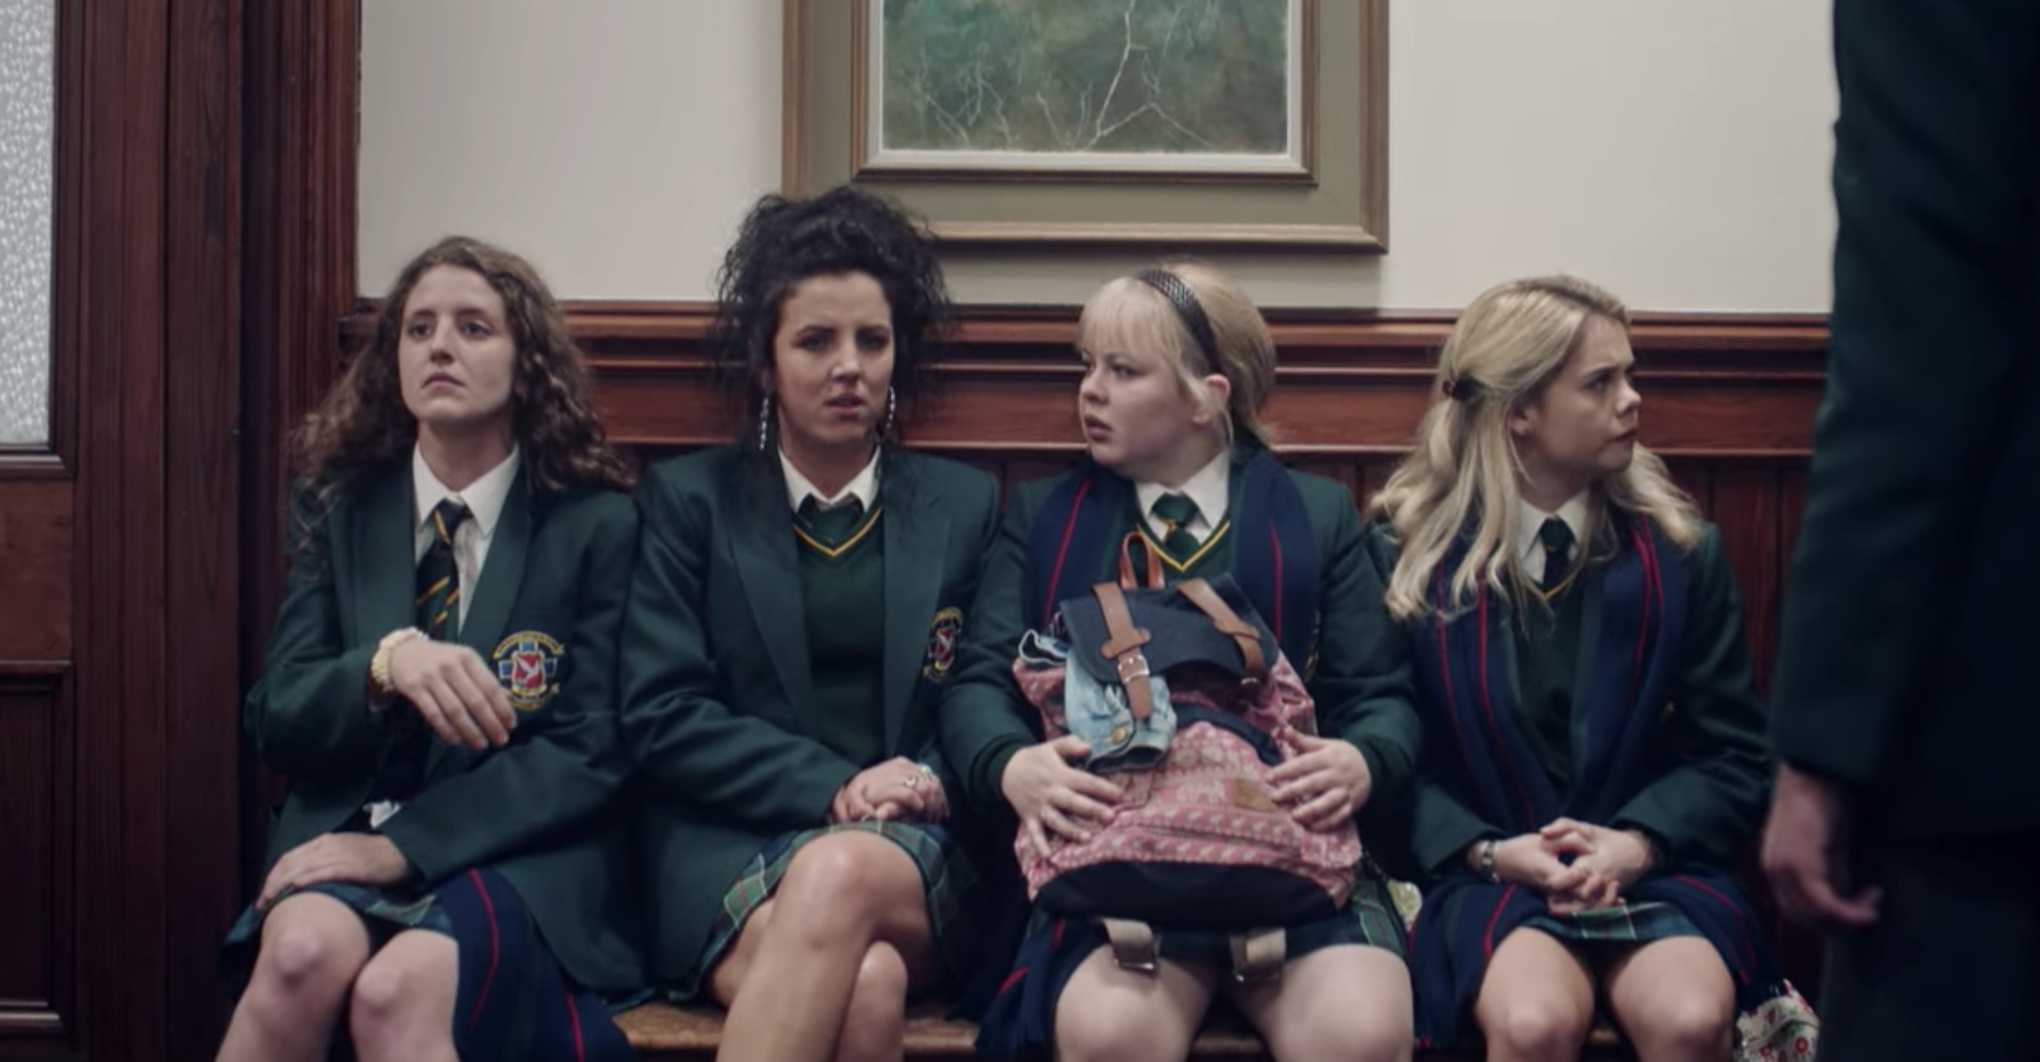 Nicola and three other girls dressed in school uniform and sitting on a bench in a scene from Derry Girls